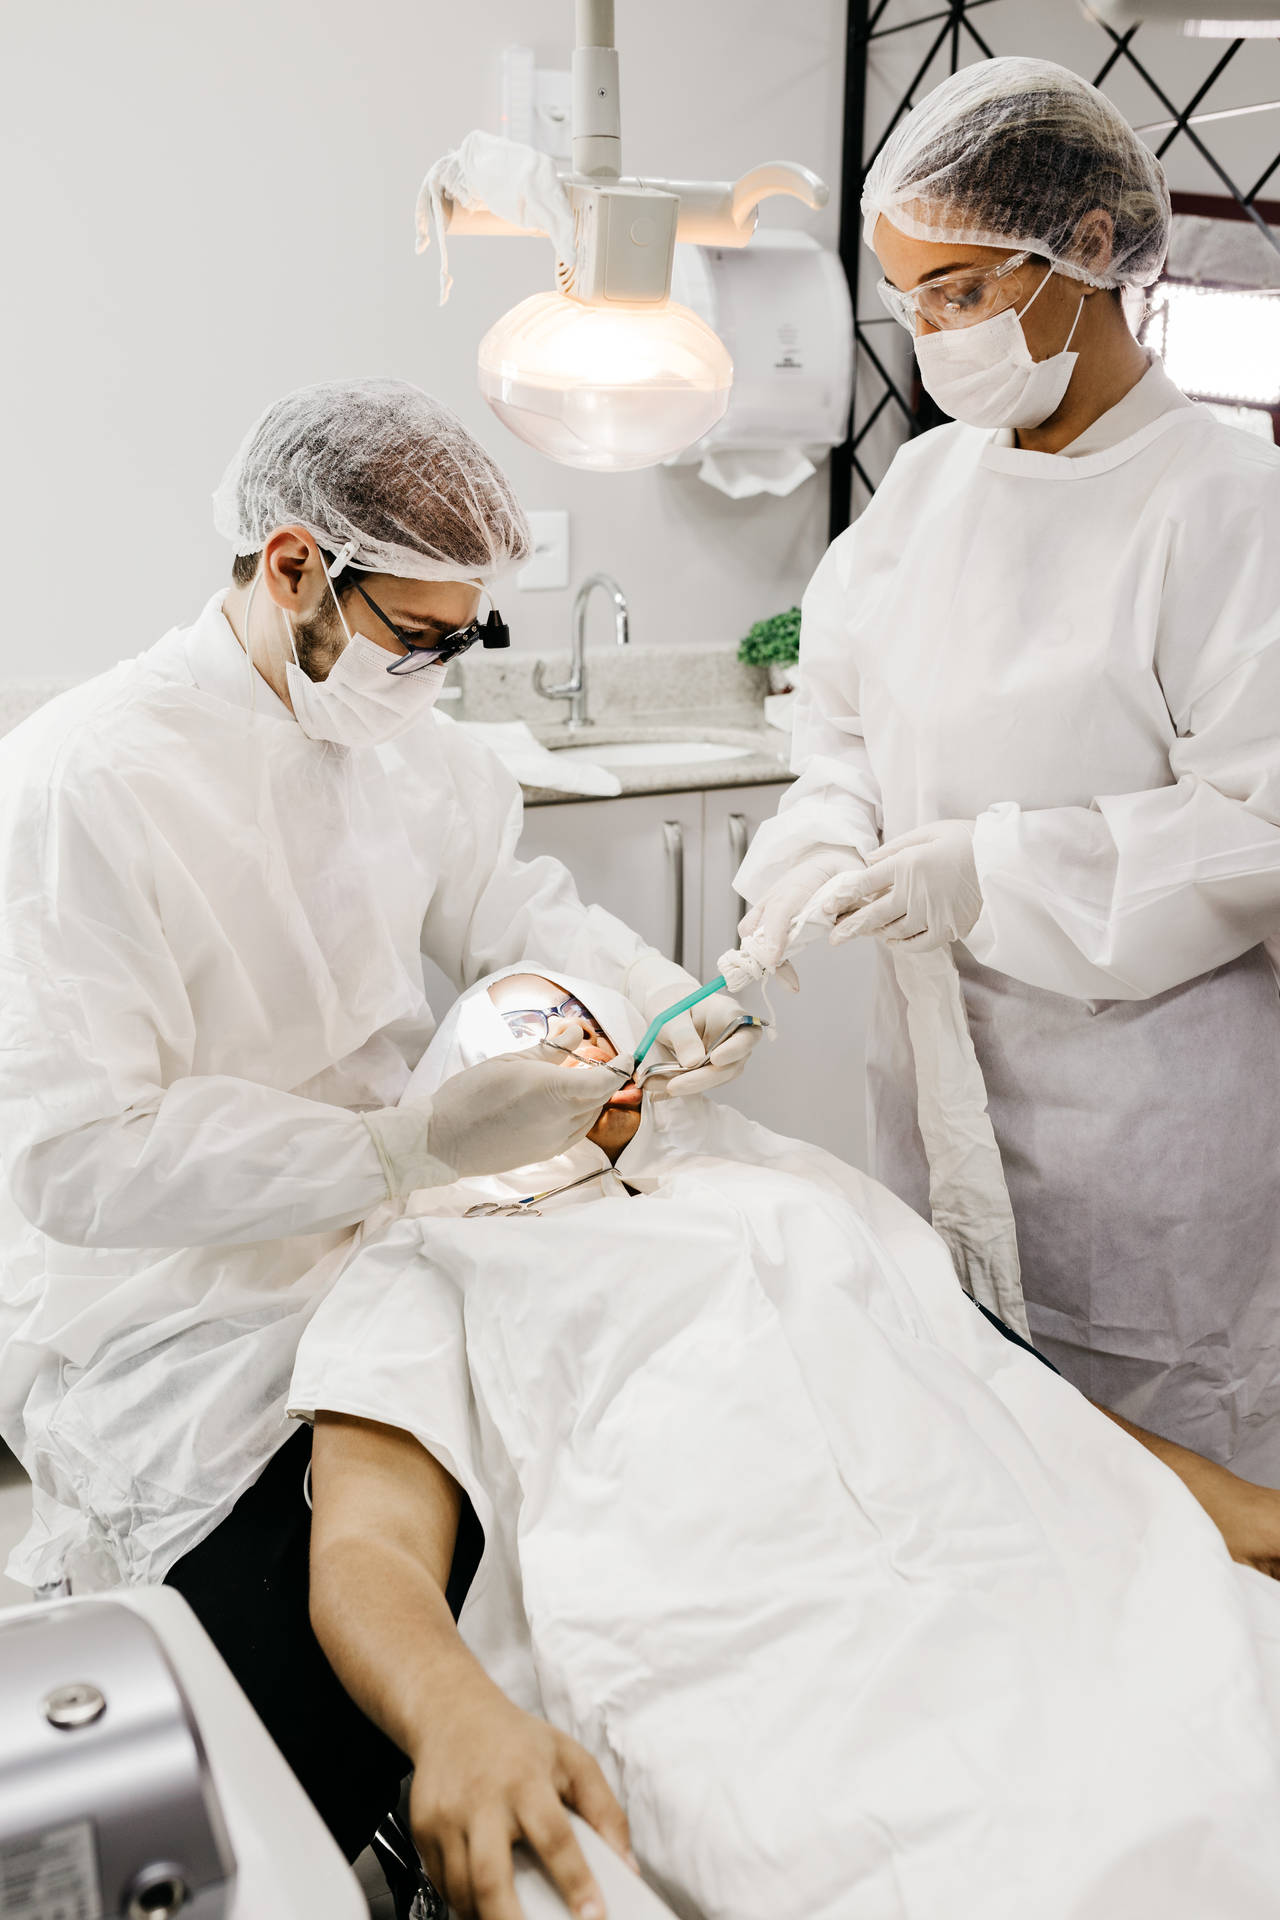 Dentists In Scrubs With Patient Dentistry